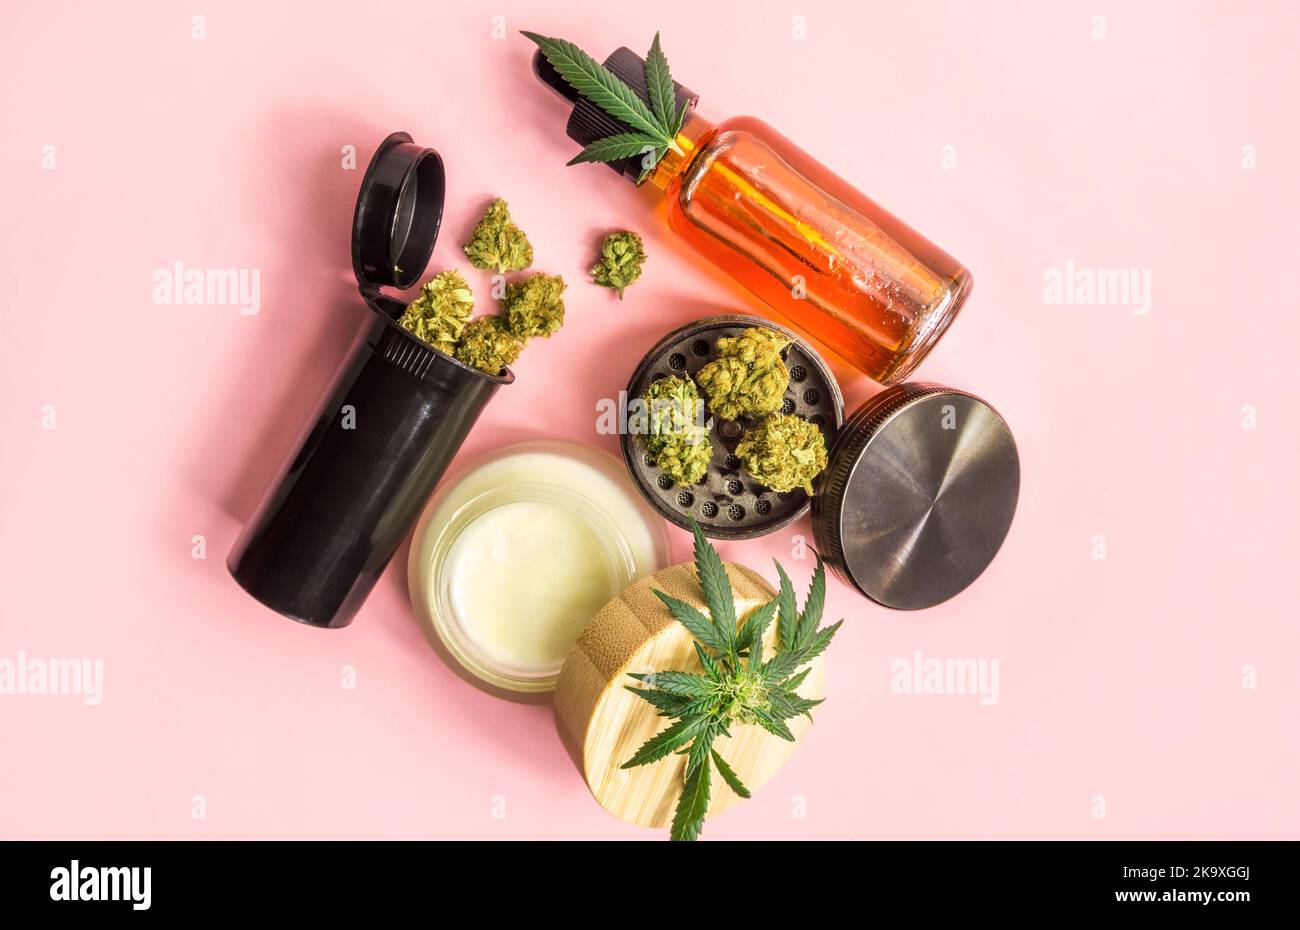 Medical cannabis or Drug, Marijuana flower buds Cannabis CBD oil, Cosmetic cream and grinder on pink background Stock Photo